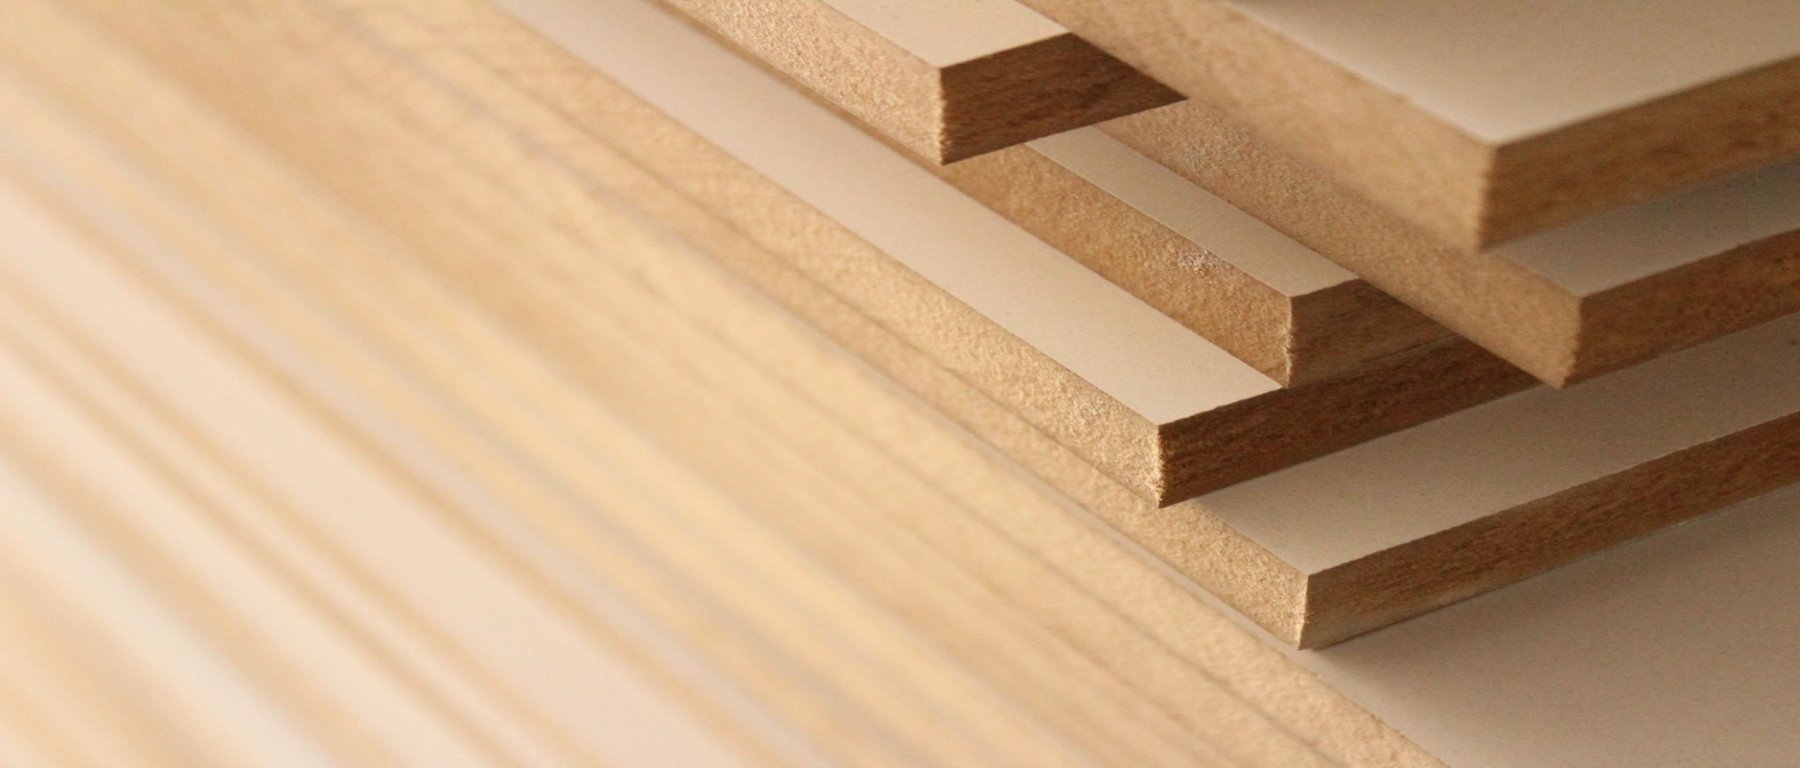 How To Identify Counterfeit Plywood | Best Plywood Brands - Austin Ply